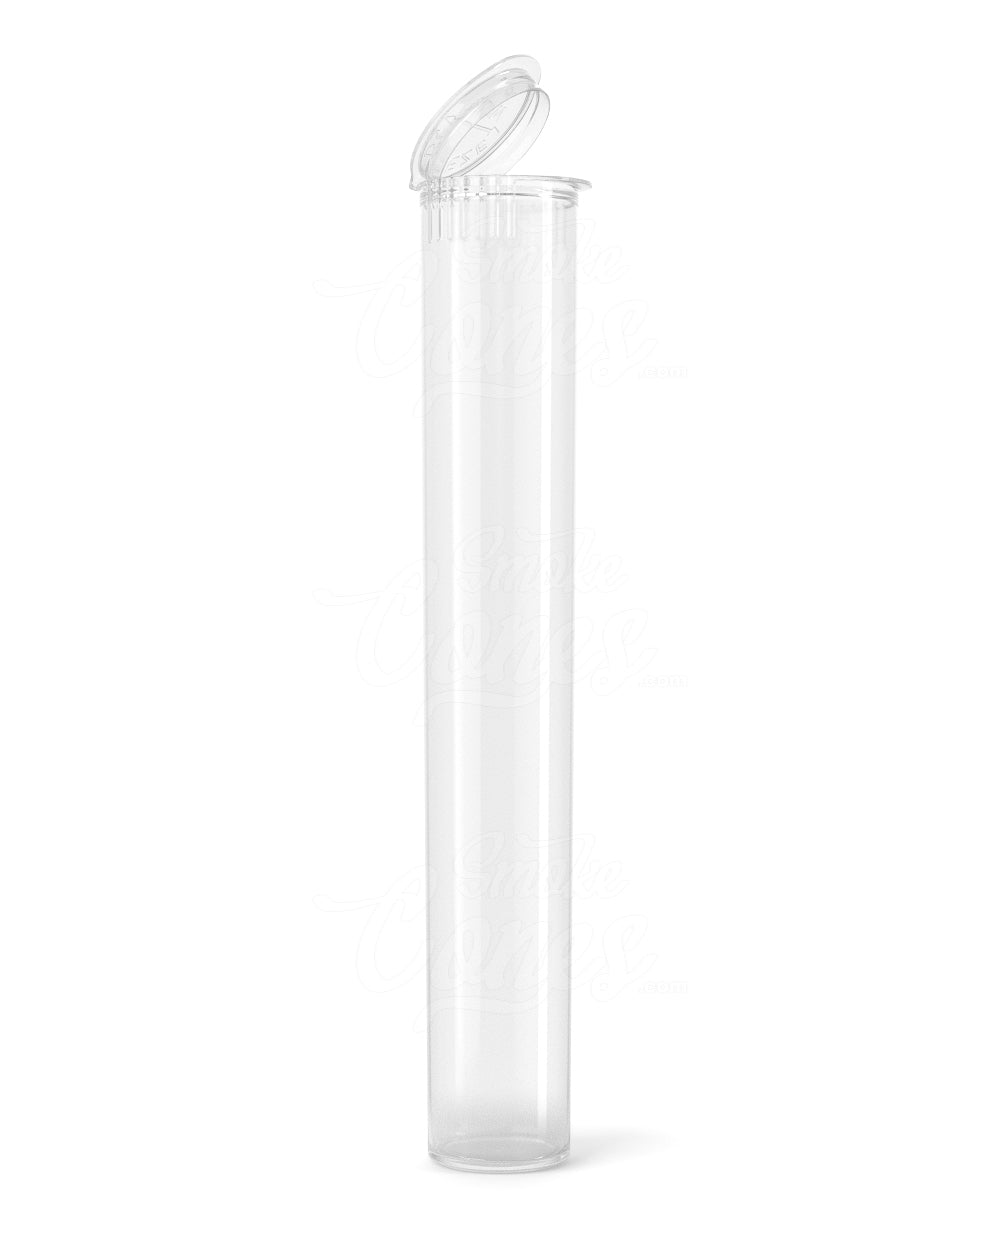 116mm Clear Opaque Child Resistant Biodegradable Pop Top Plastic Pre-Roll Tubes 1000/Box - 1